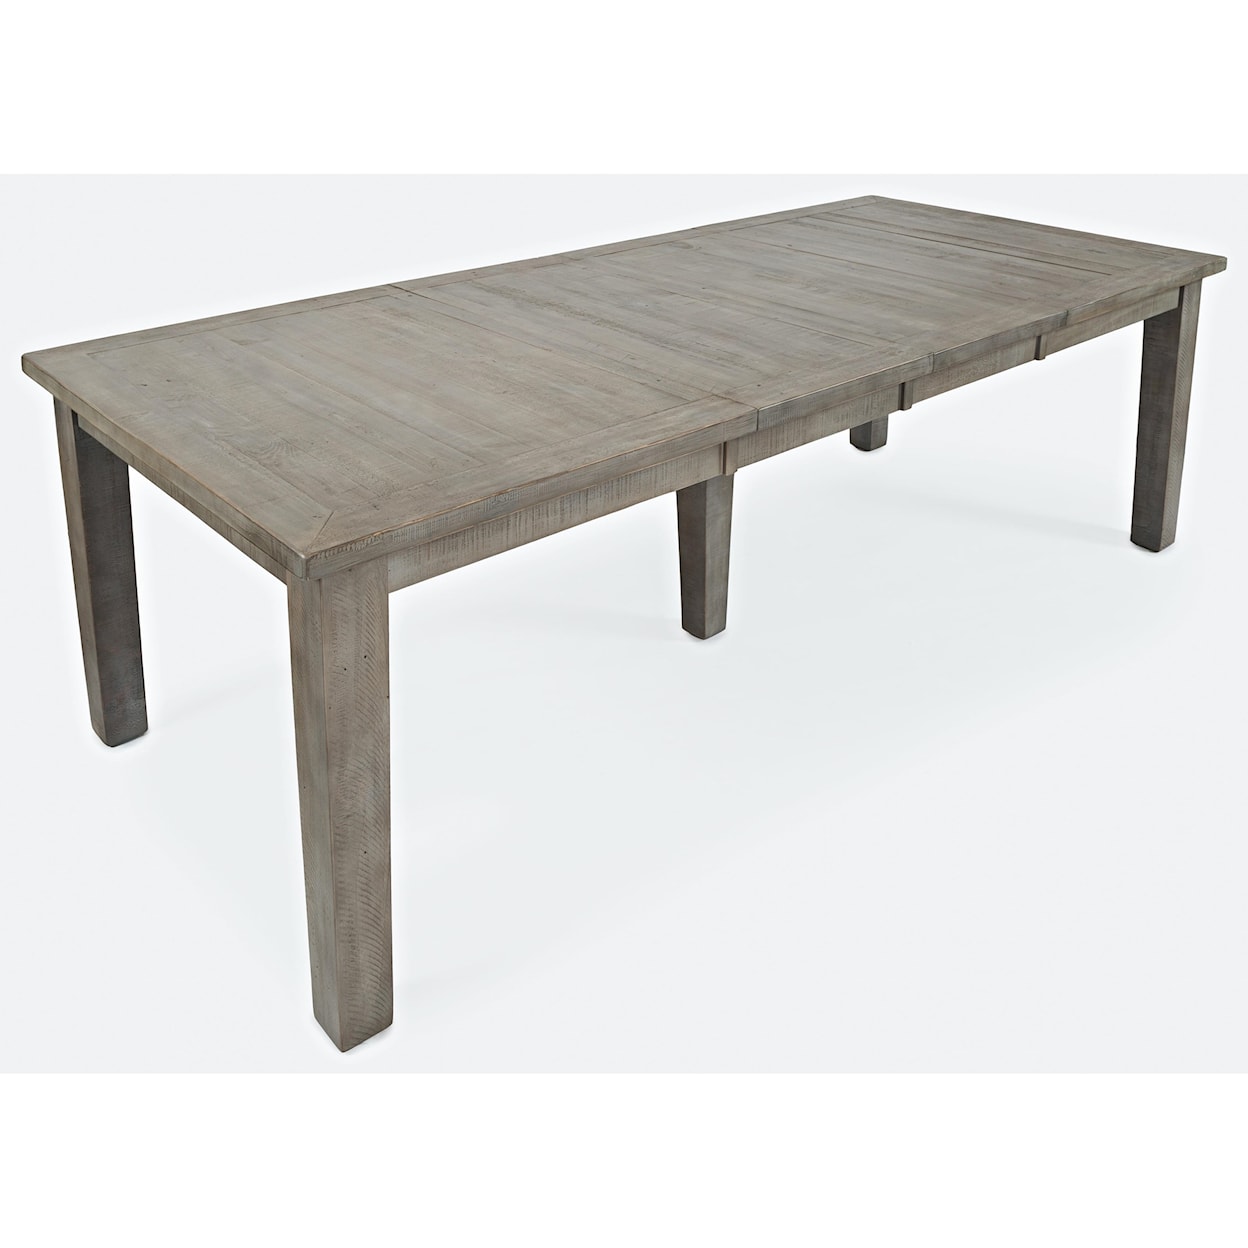 VFM Signature Outer Banks Rect. Dining Table